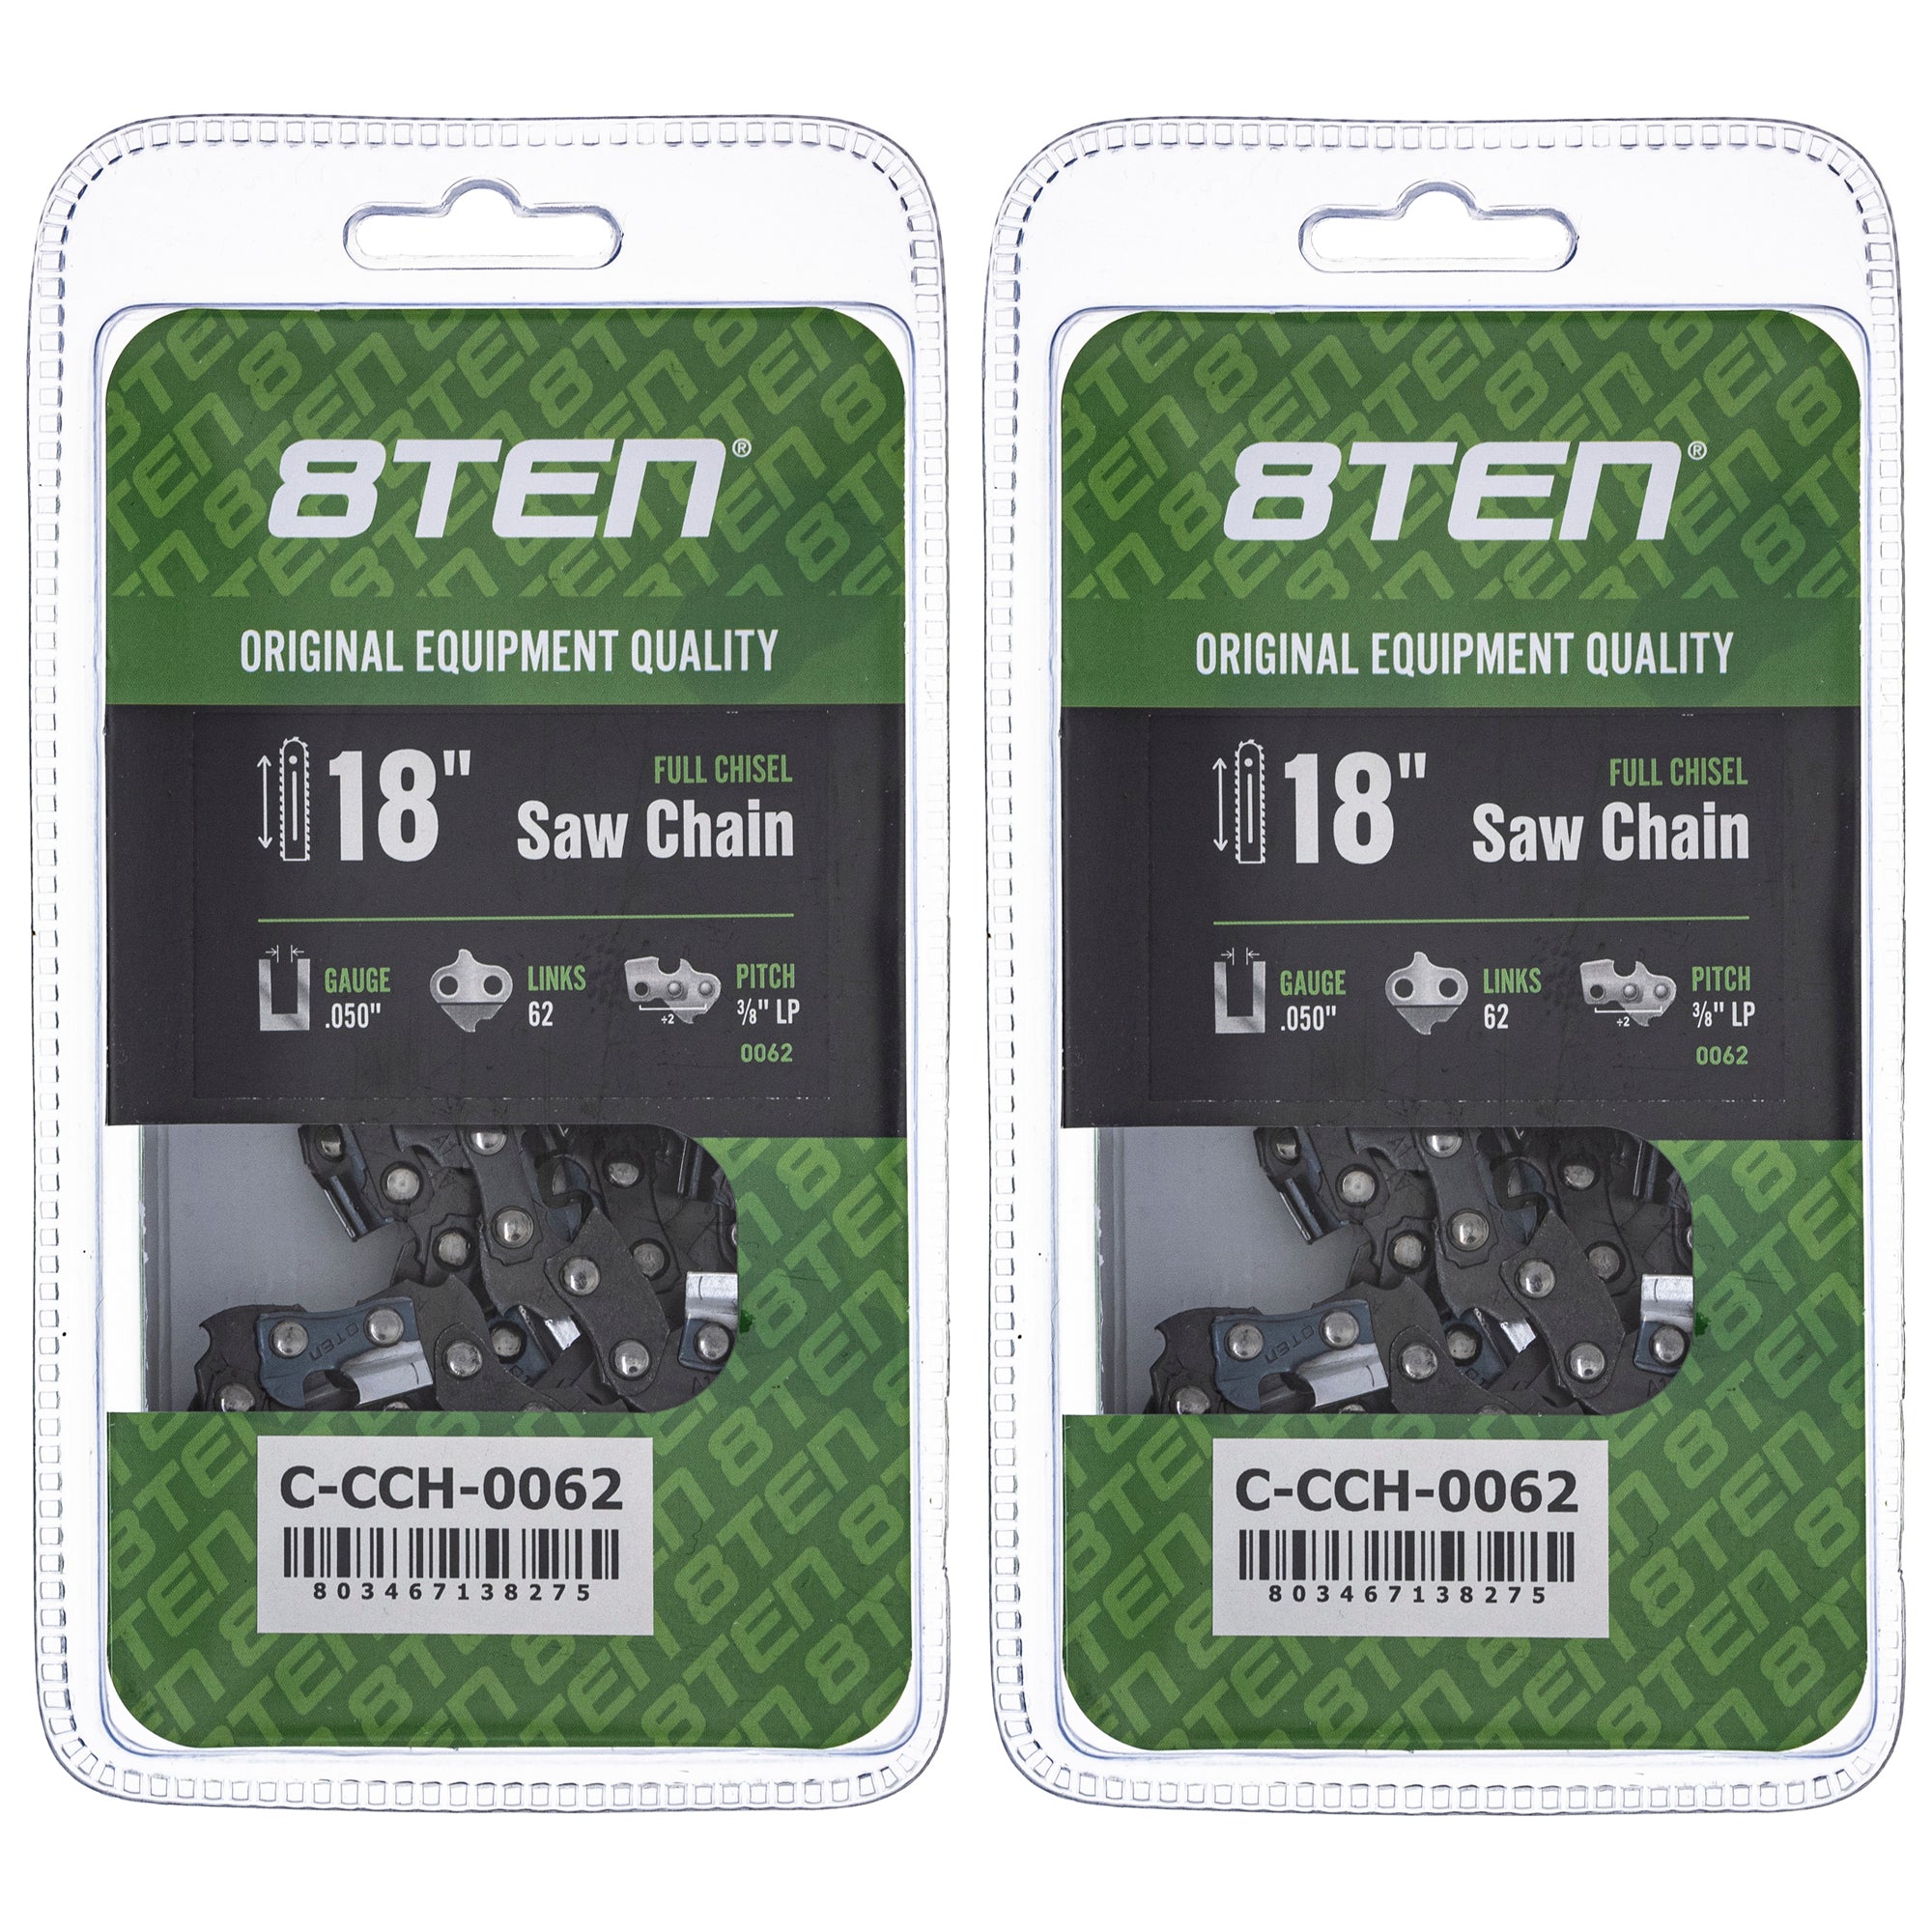 Chainsaw Chain 18 Inch .050 3/8 LP 62DL 2-Pack for zOTHER Stens Oregon Ref. Oregon Echo 8TEN 810-CCC2284H